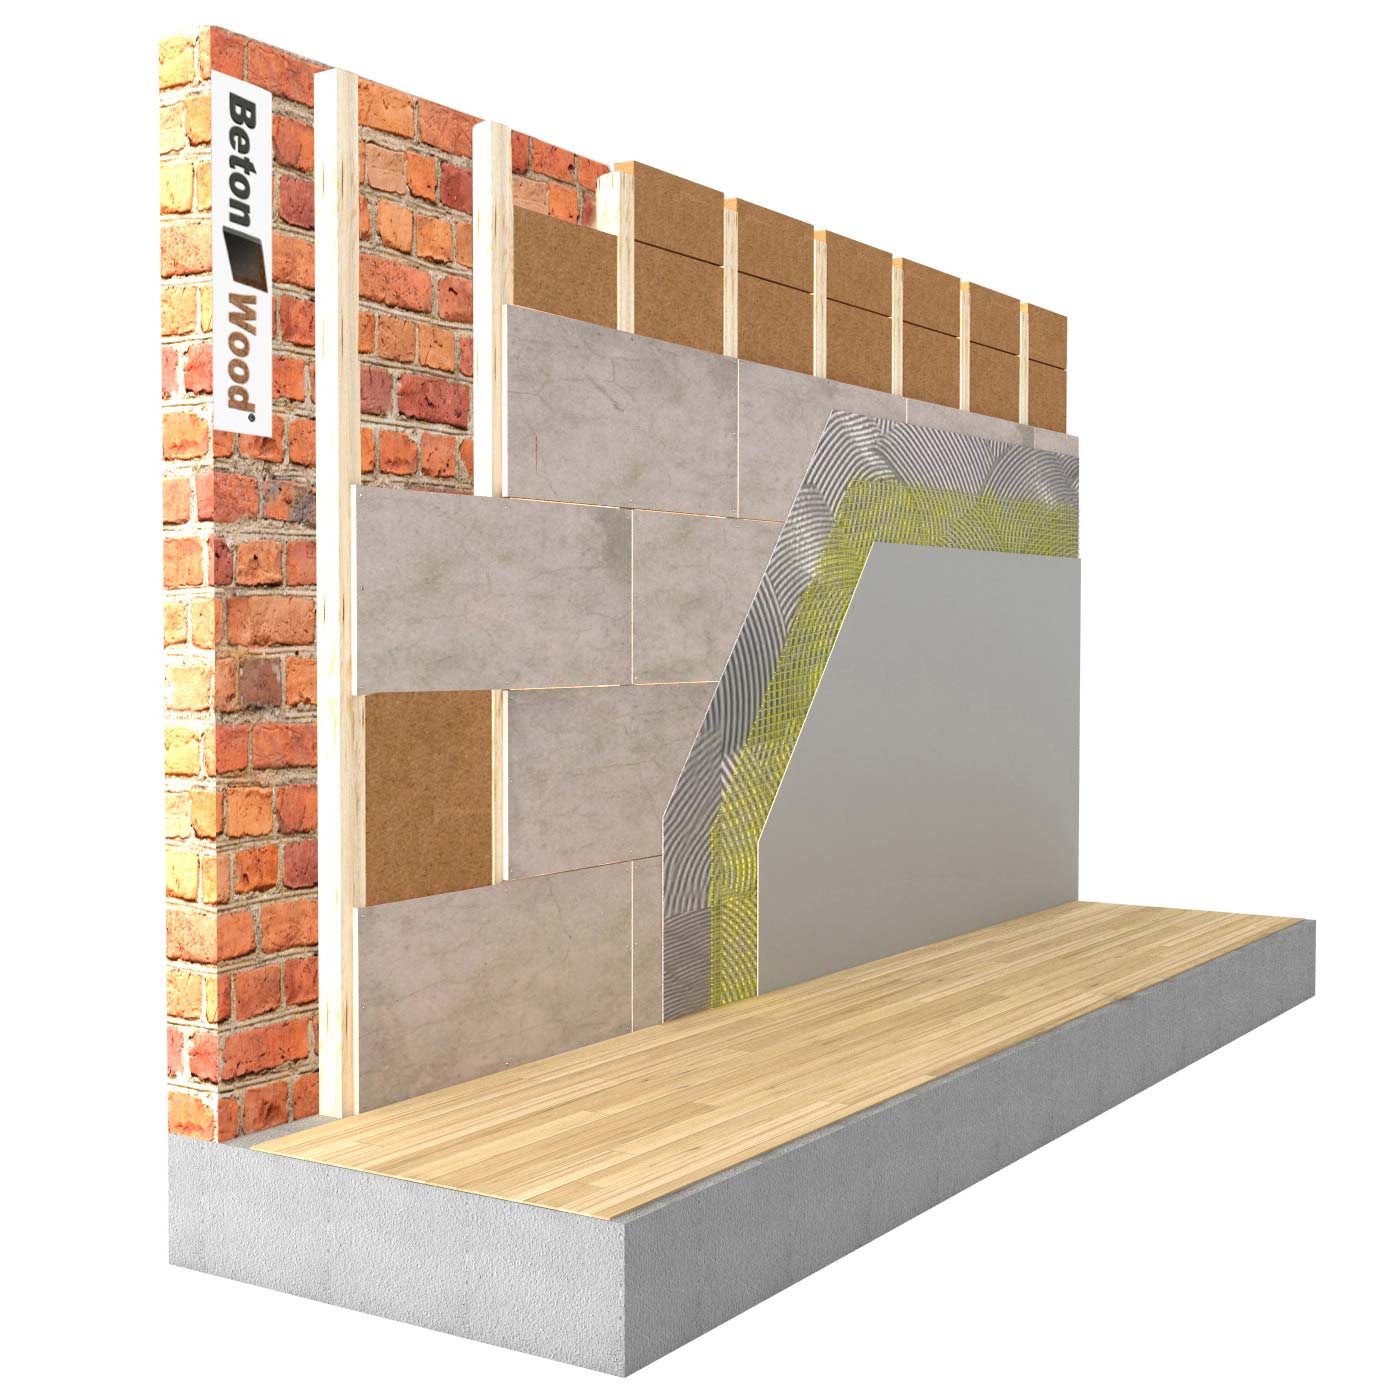 Internal insulation system with Therm SD fiber wood on masonry